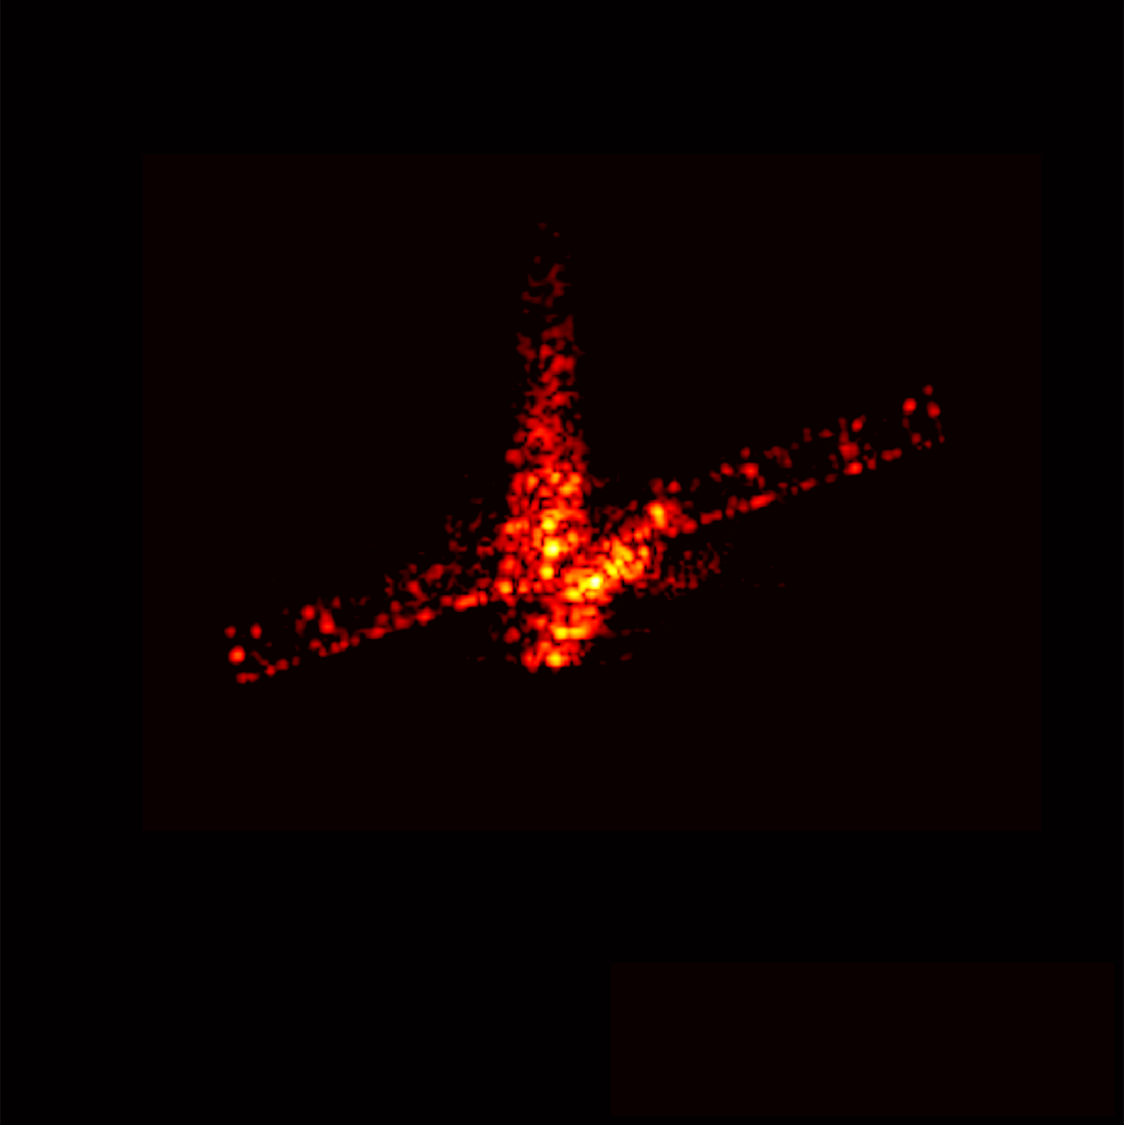 Final images of Aeolus during its brief phase as space debris. (Note that the color in these final images represents the radar echo intensity, not temperature.) 